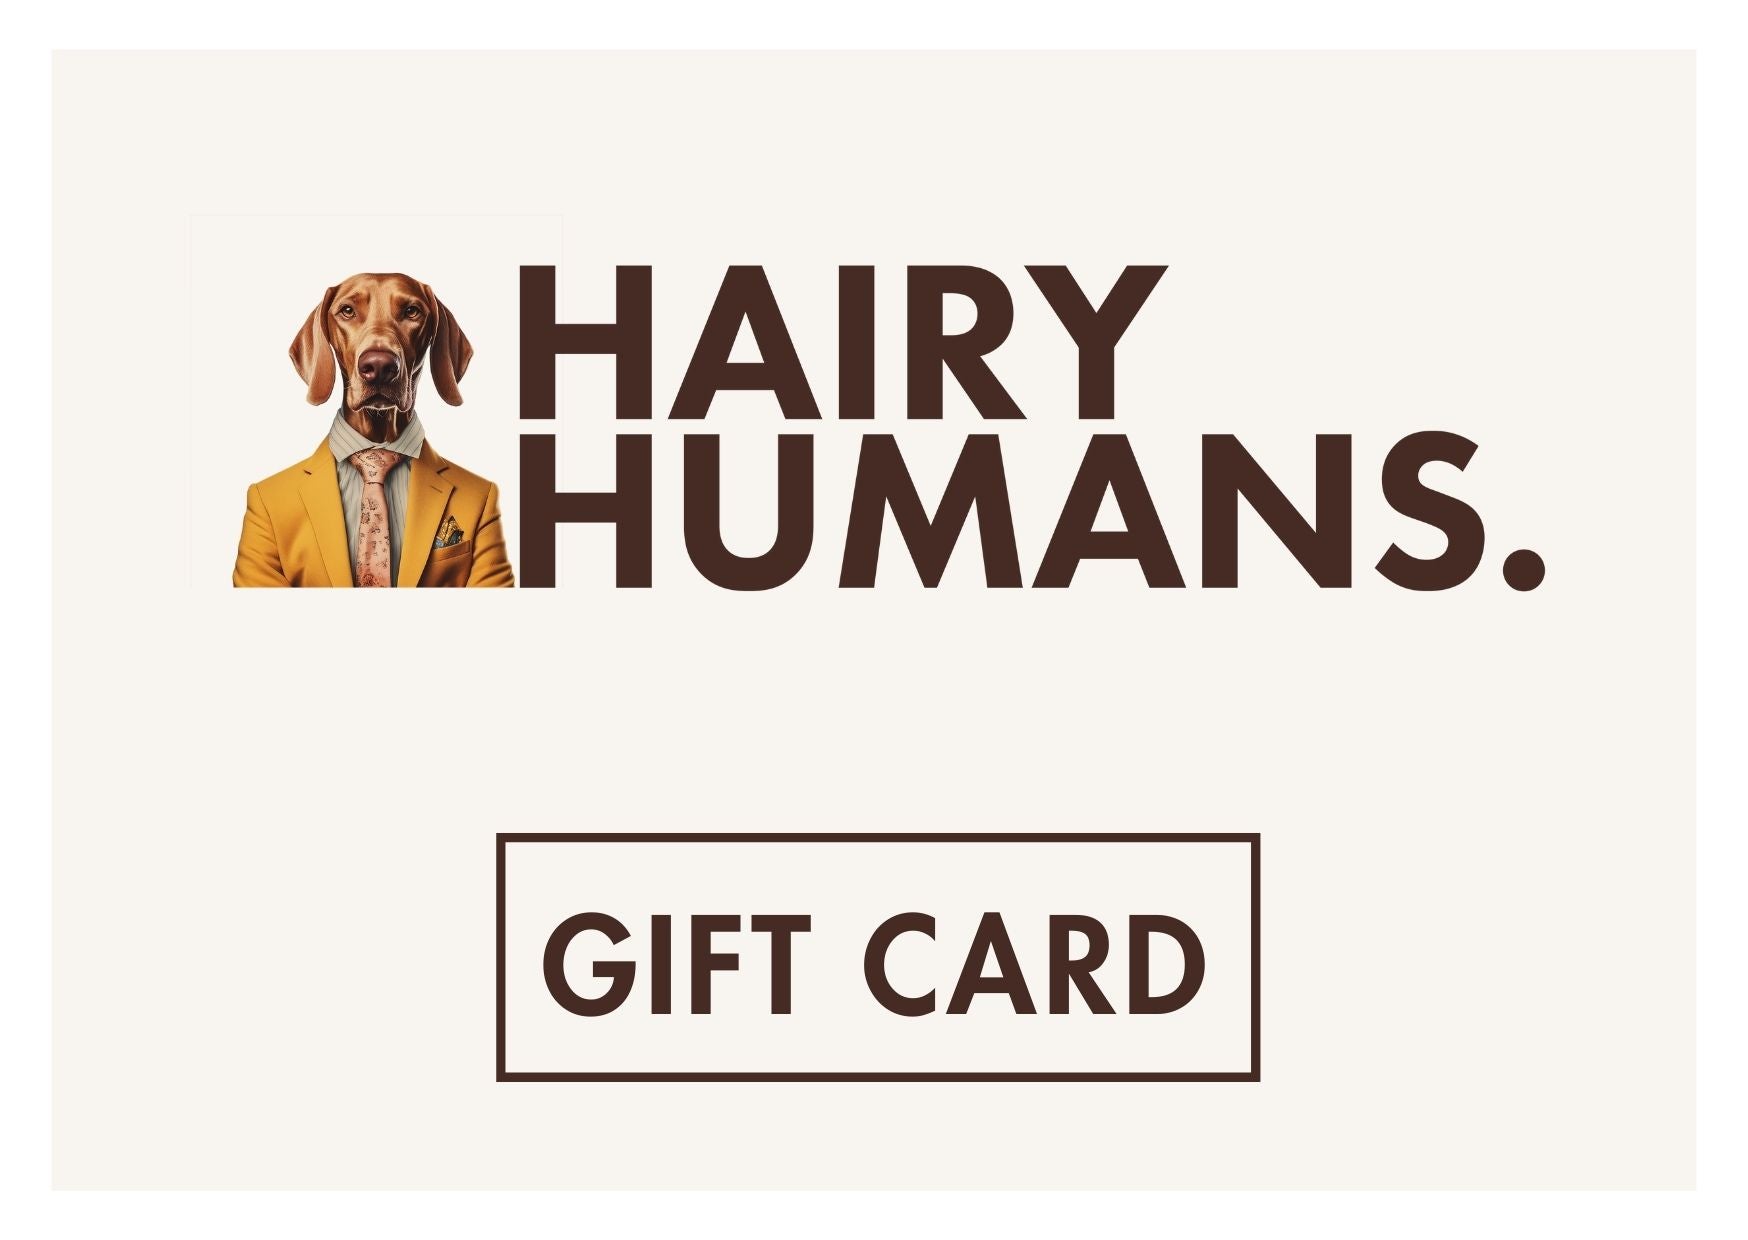 Hairy Humans Gift Card - Hairy Humans